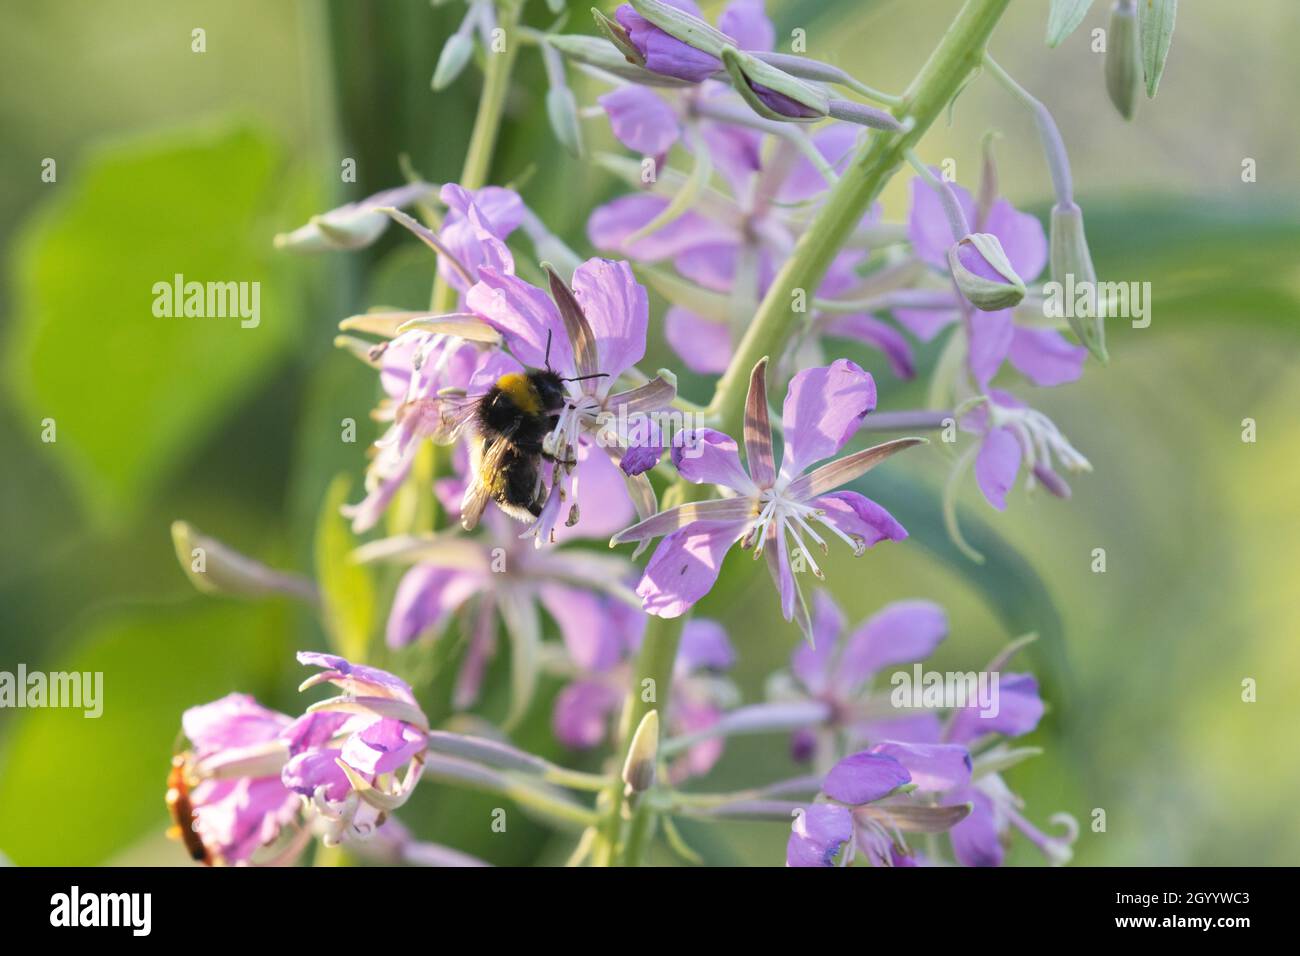 A small Bumblebee pollinating a light pink Fireweed, Epilobium angustifolium on a summer evening in Estonia. Stock Photo